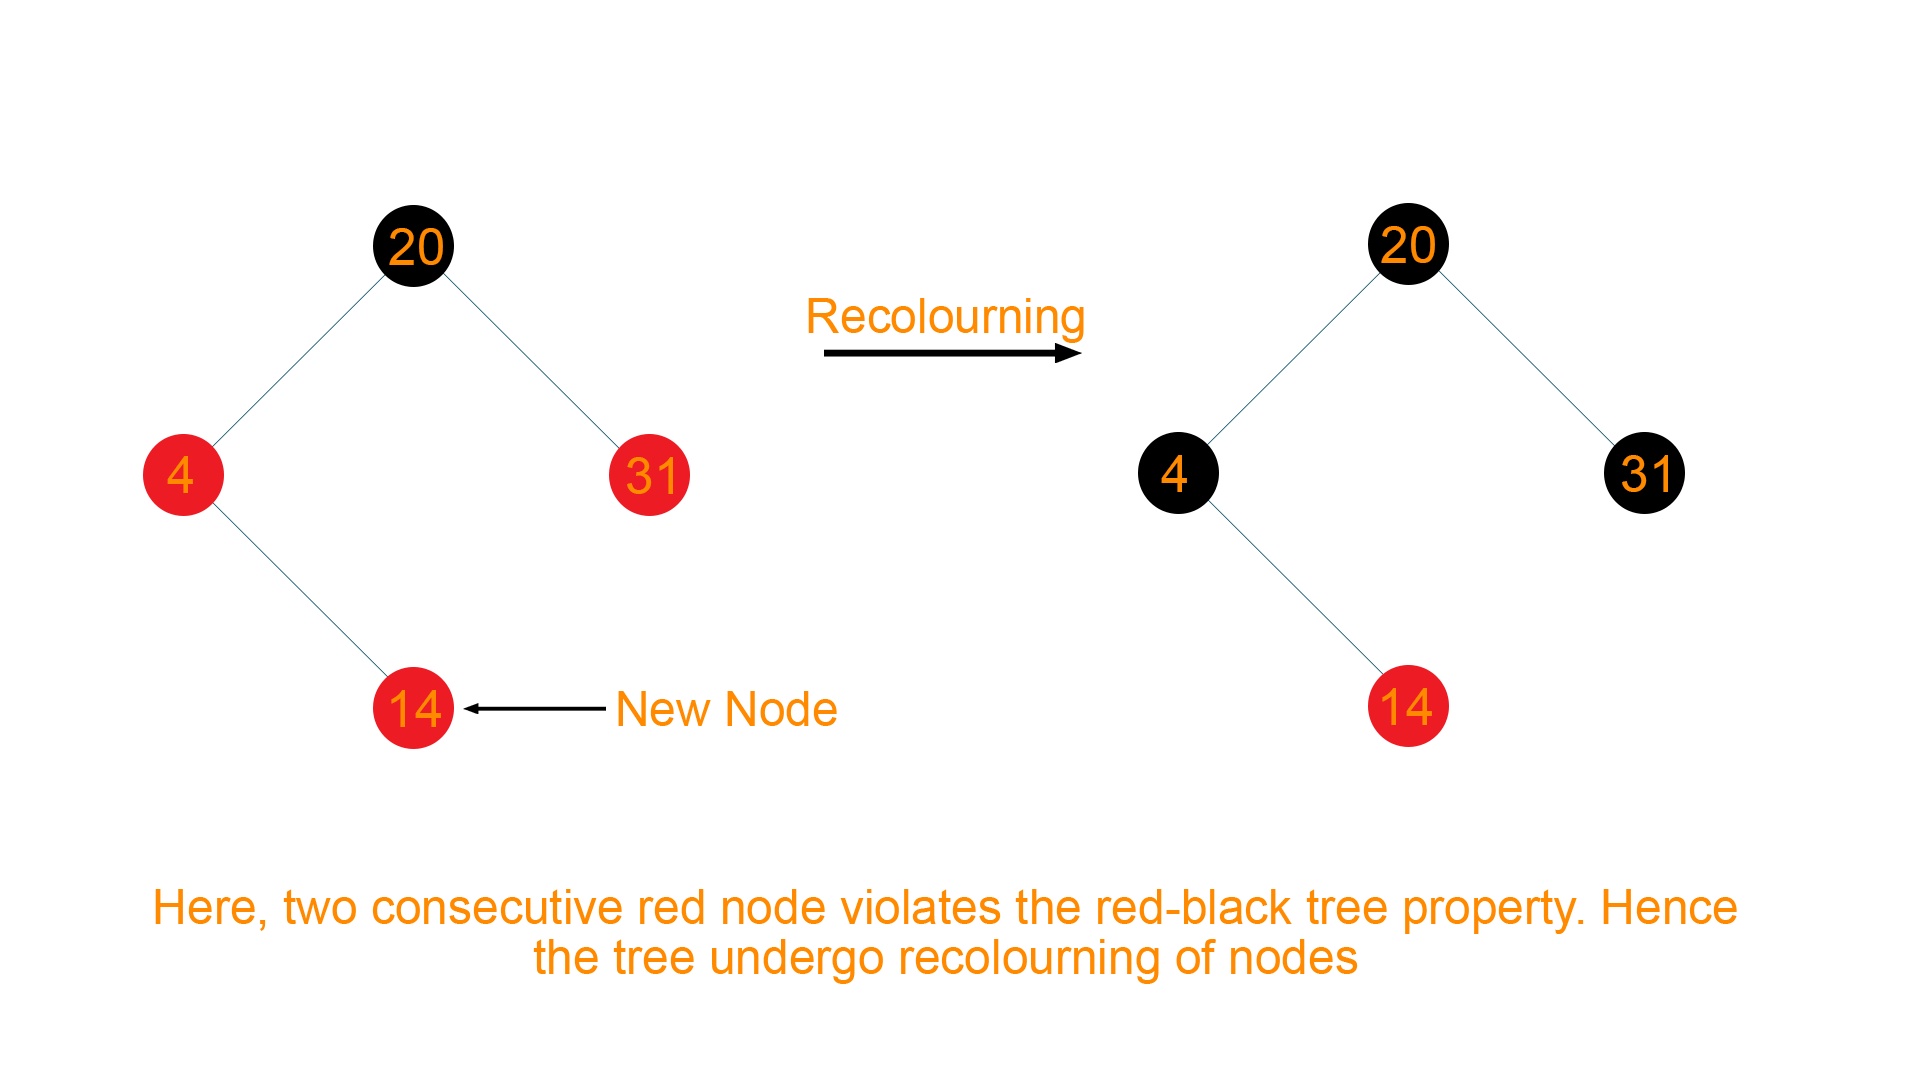 Recolouring of the nodes 